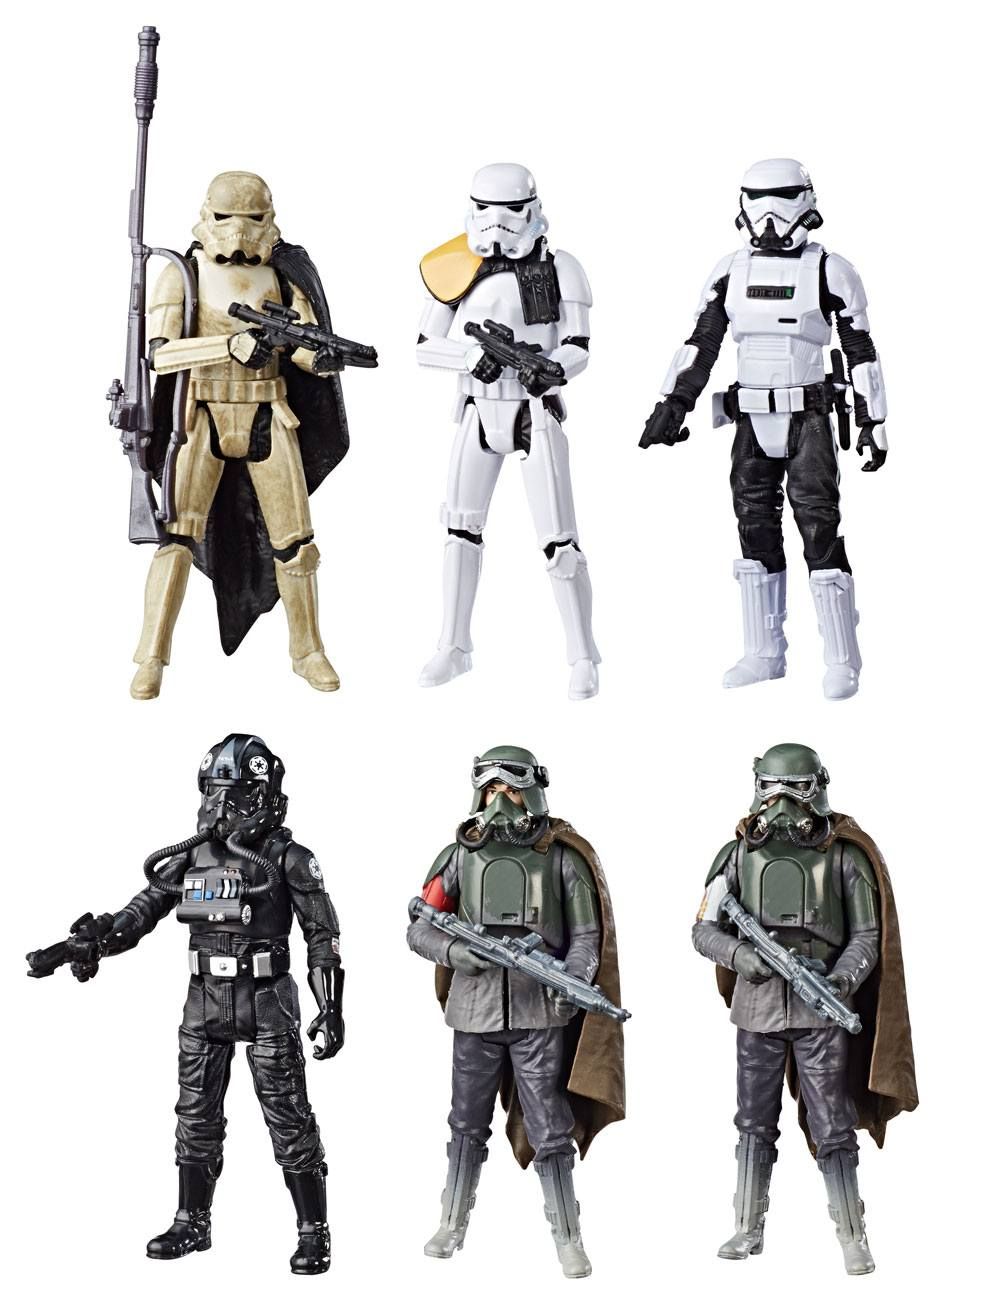 Star Wars Solo Force Link 2.0 Akční Figure 6-Pack 2018 Exclusive 10 cm Hasbro